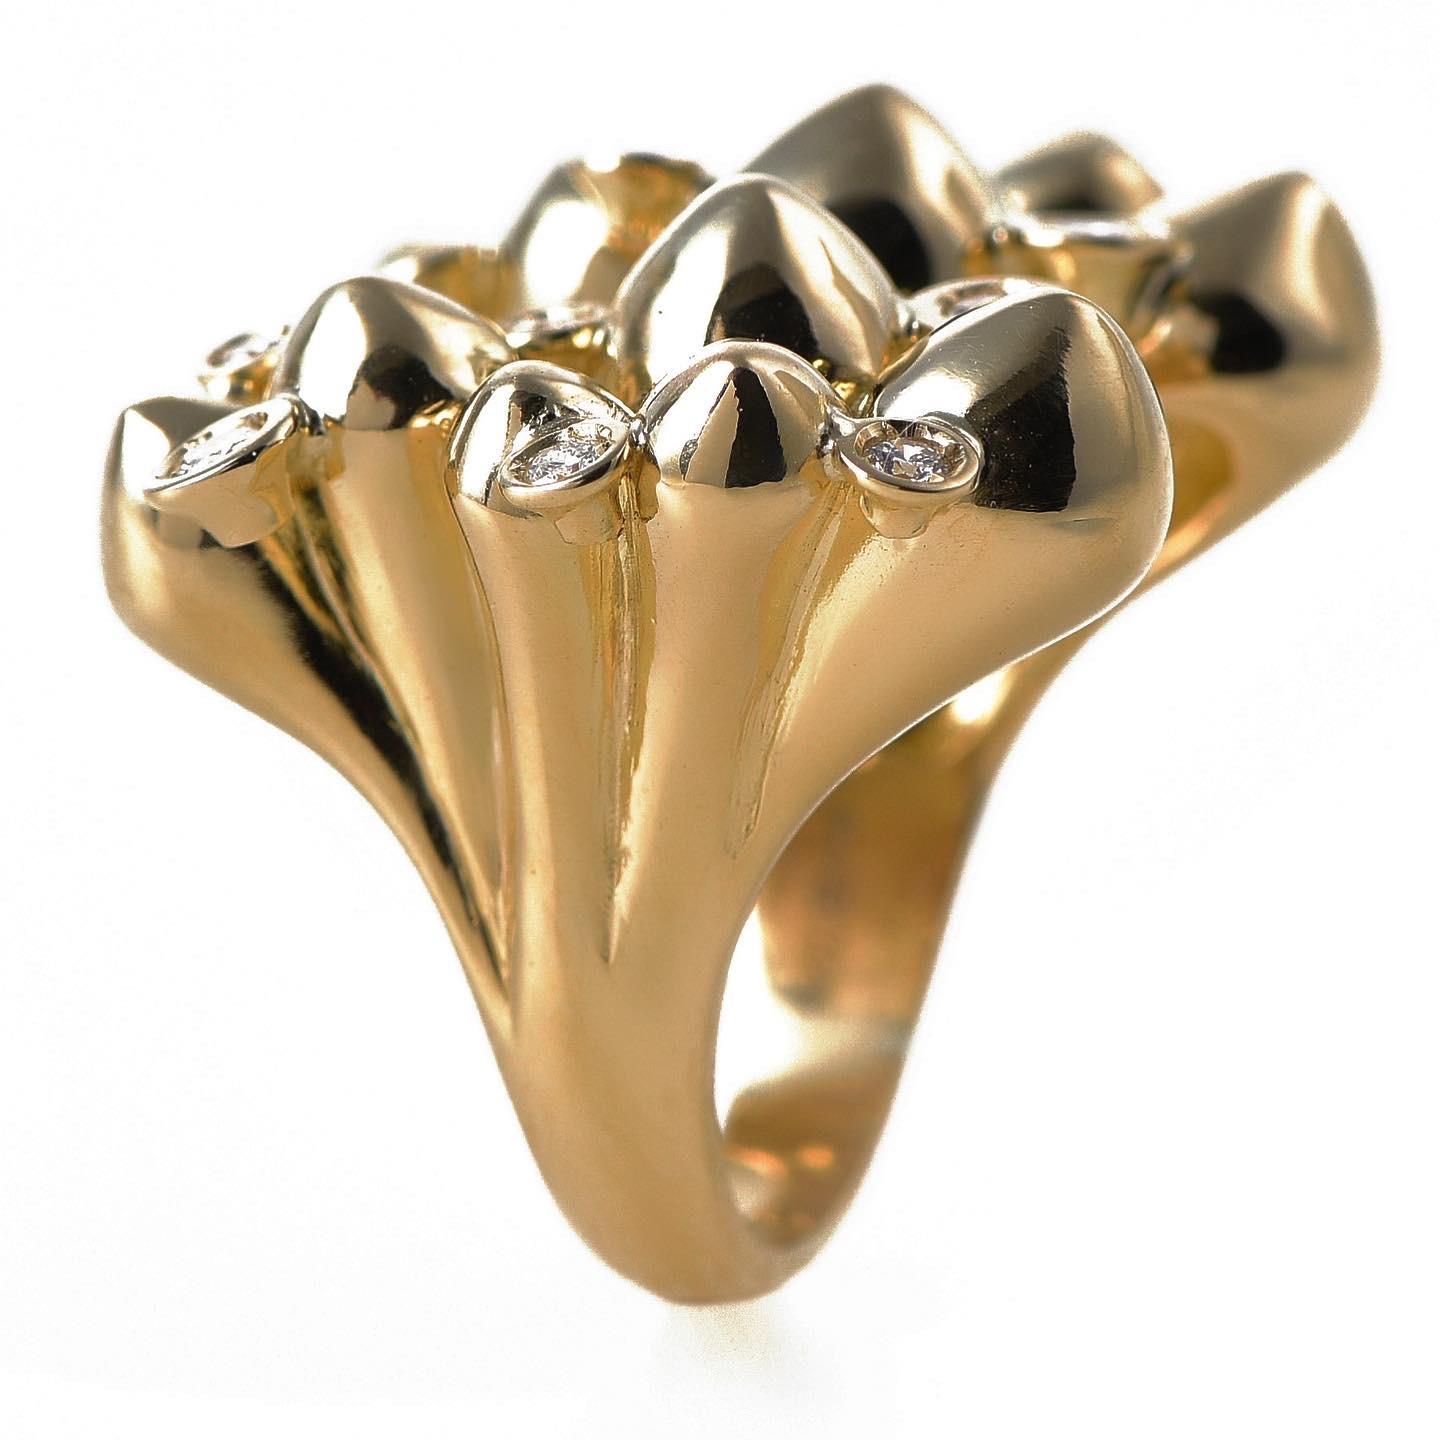 The ‘Spike cluster’, ring is masterfully hand sculpted and crafted in 18K yellow gold, hallmarked in Cyprus. This impressive and robust, open statement ring comes in a highly polished finish,  features 0,38 Ct. White V.S. Diamonds and makes the